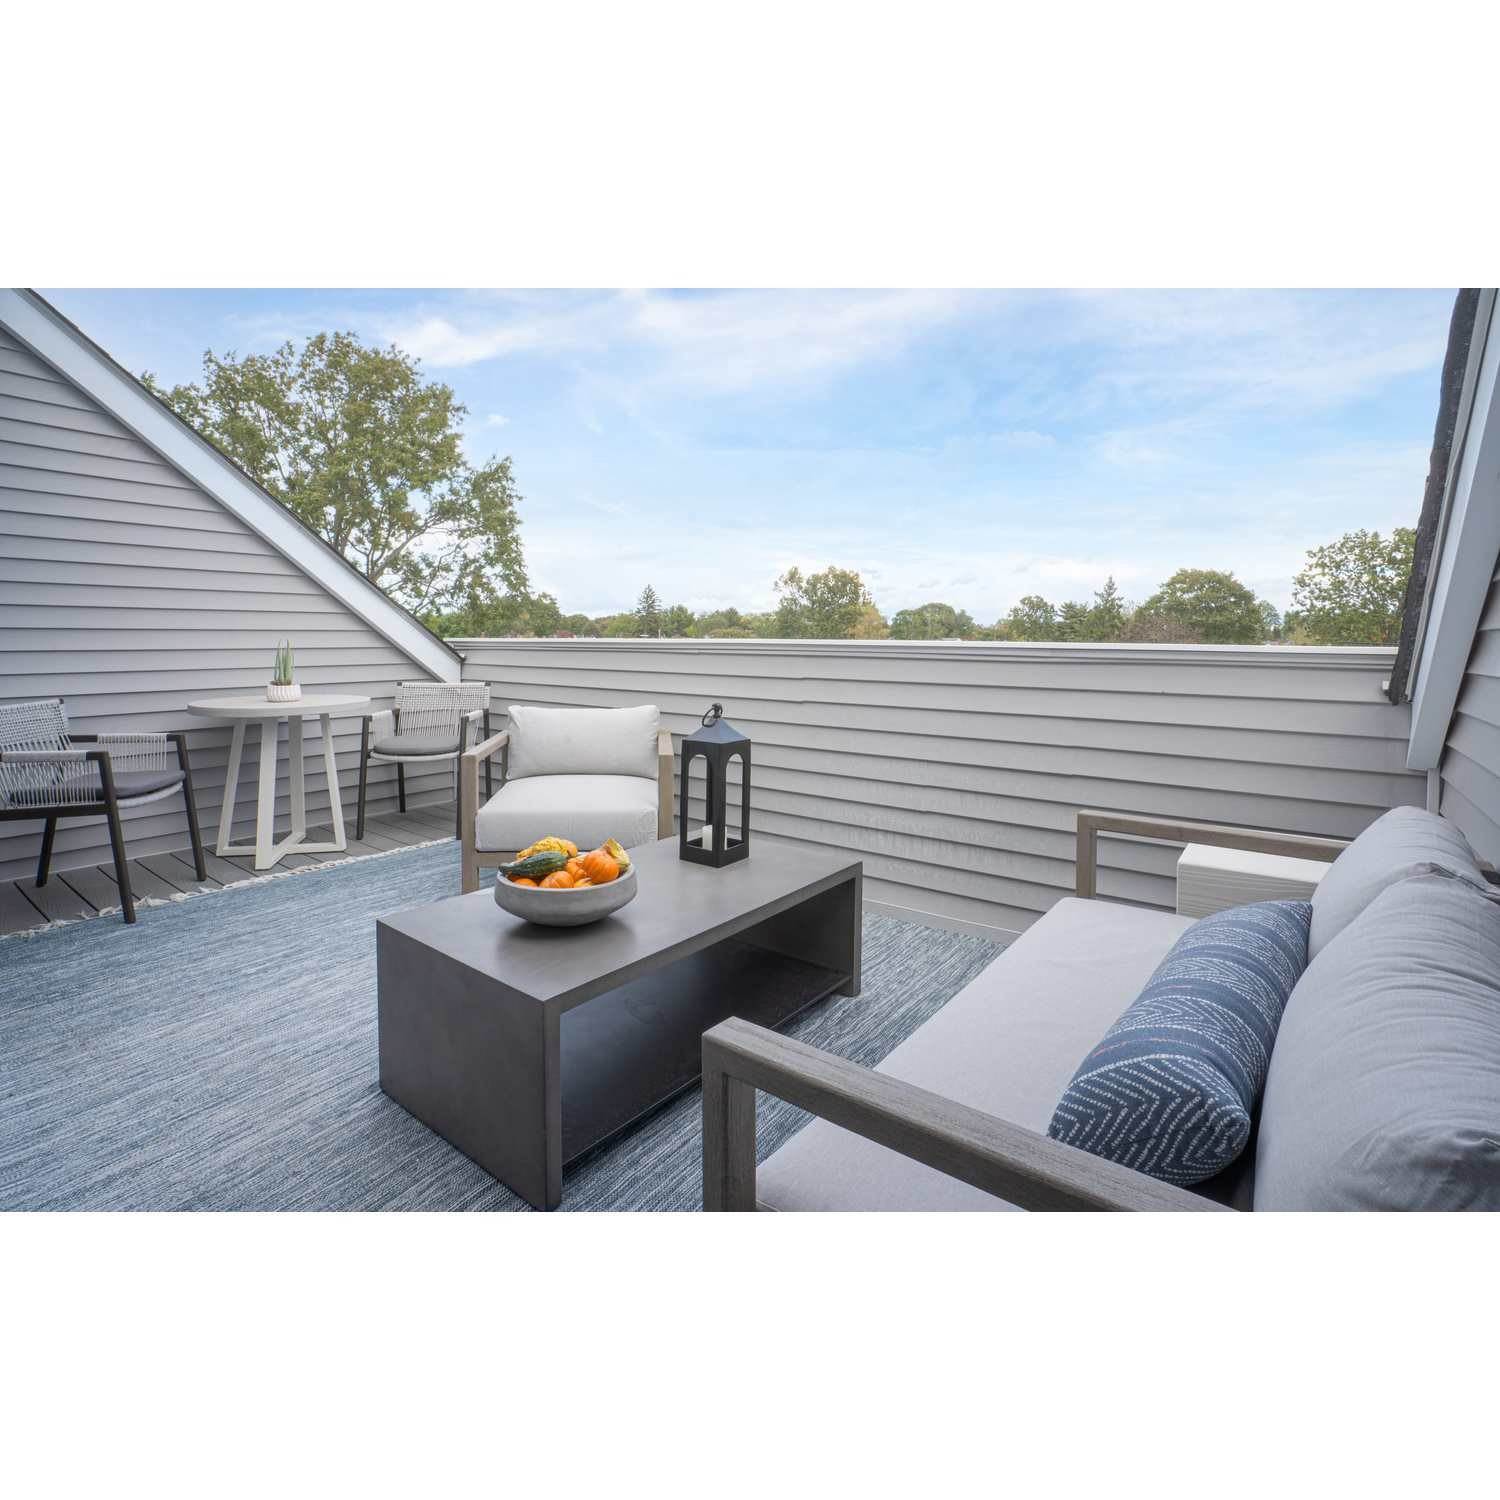 50. Meadowbrook Pointe East Meadow xây dựng tại 123 Merrick Avenue, East Meadow, NY 11554